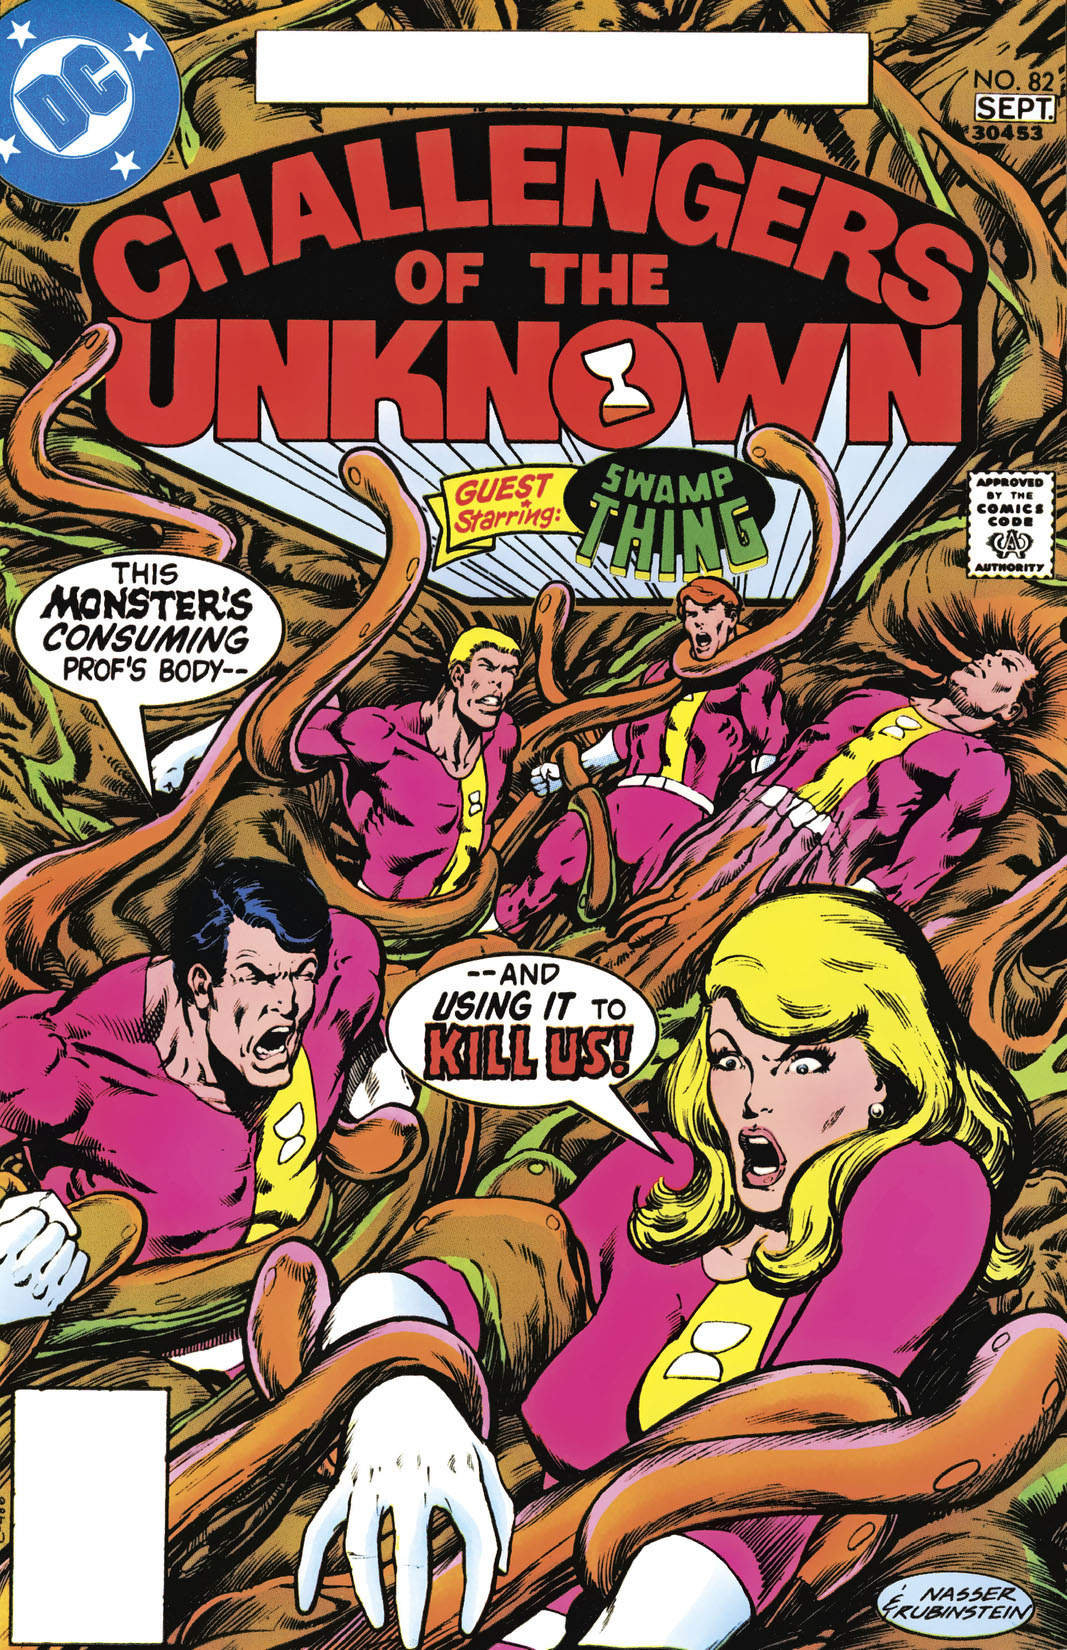 Challengers of the Unknown (1958-) #82 preview images